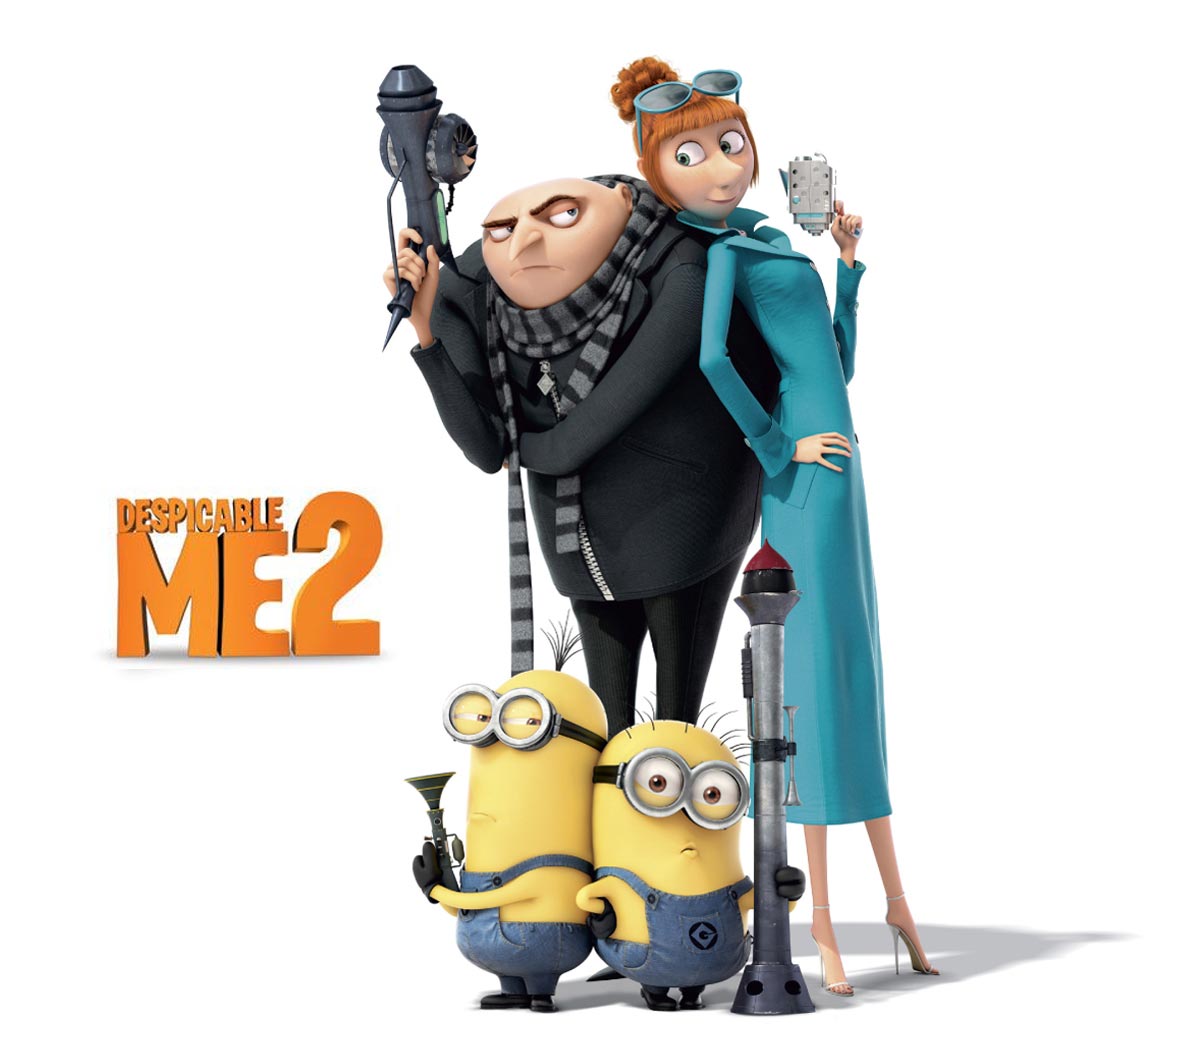 Despicable Me 2 Full Movie Online Free Watch